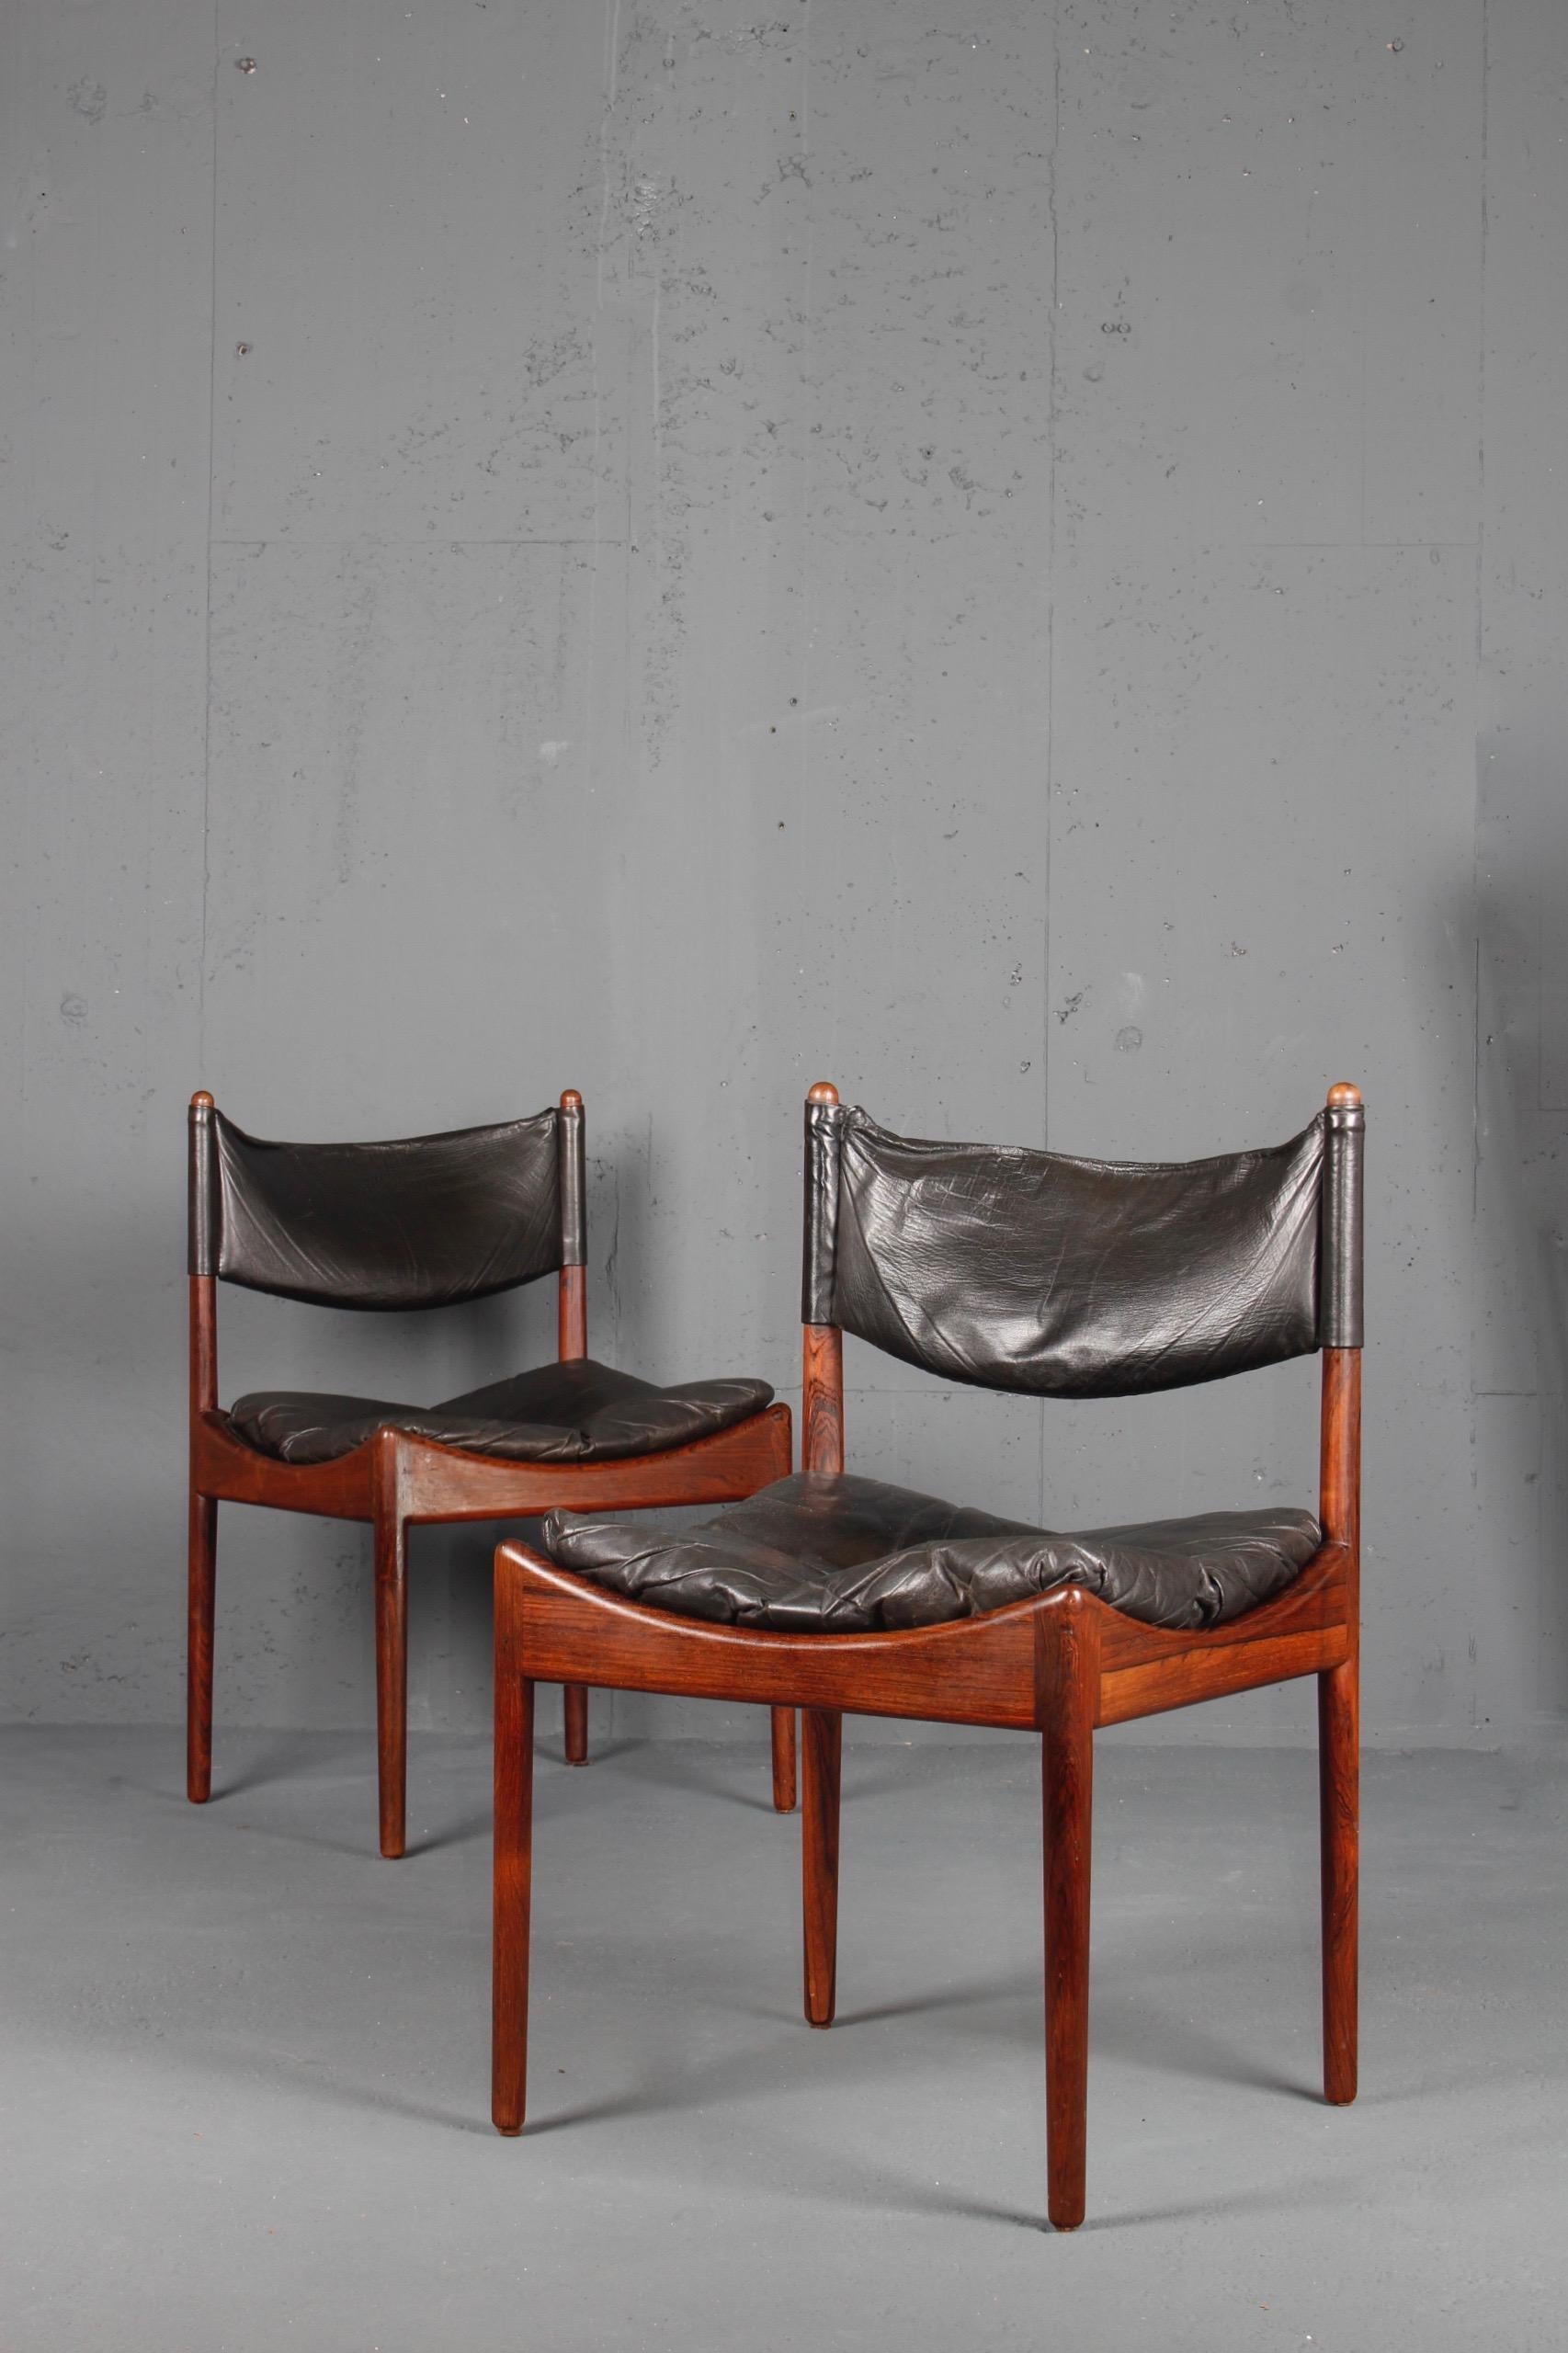 Leather and wood chair by Kristian Solmer Vedel for Søren Willadse.